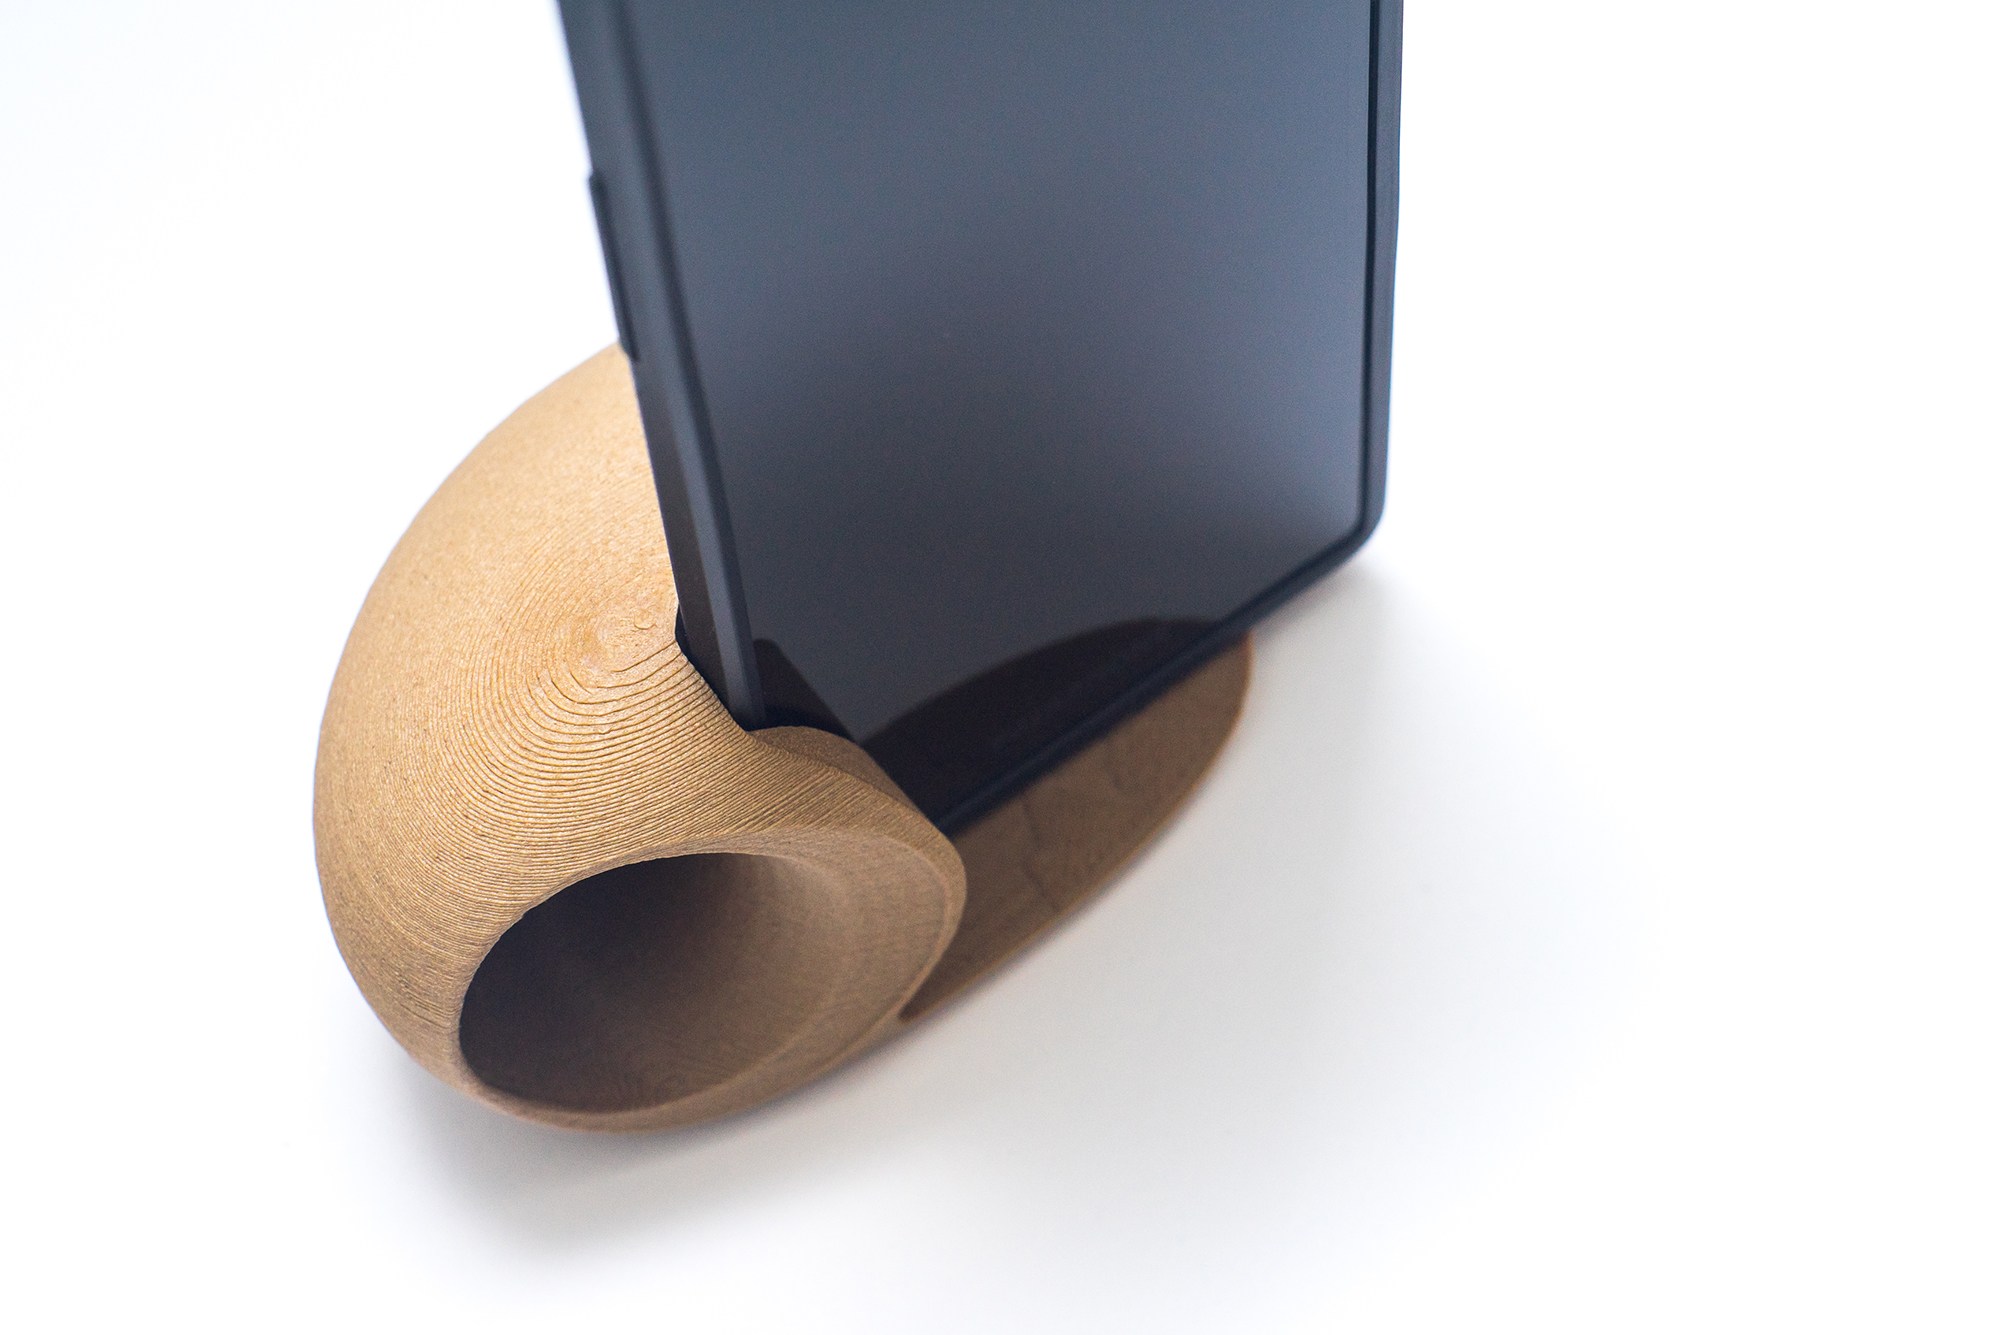 3D printed woodfill amplifier from 3D hubs for modular smartphone Fairphone 2